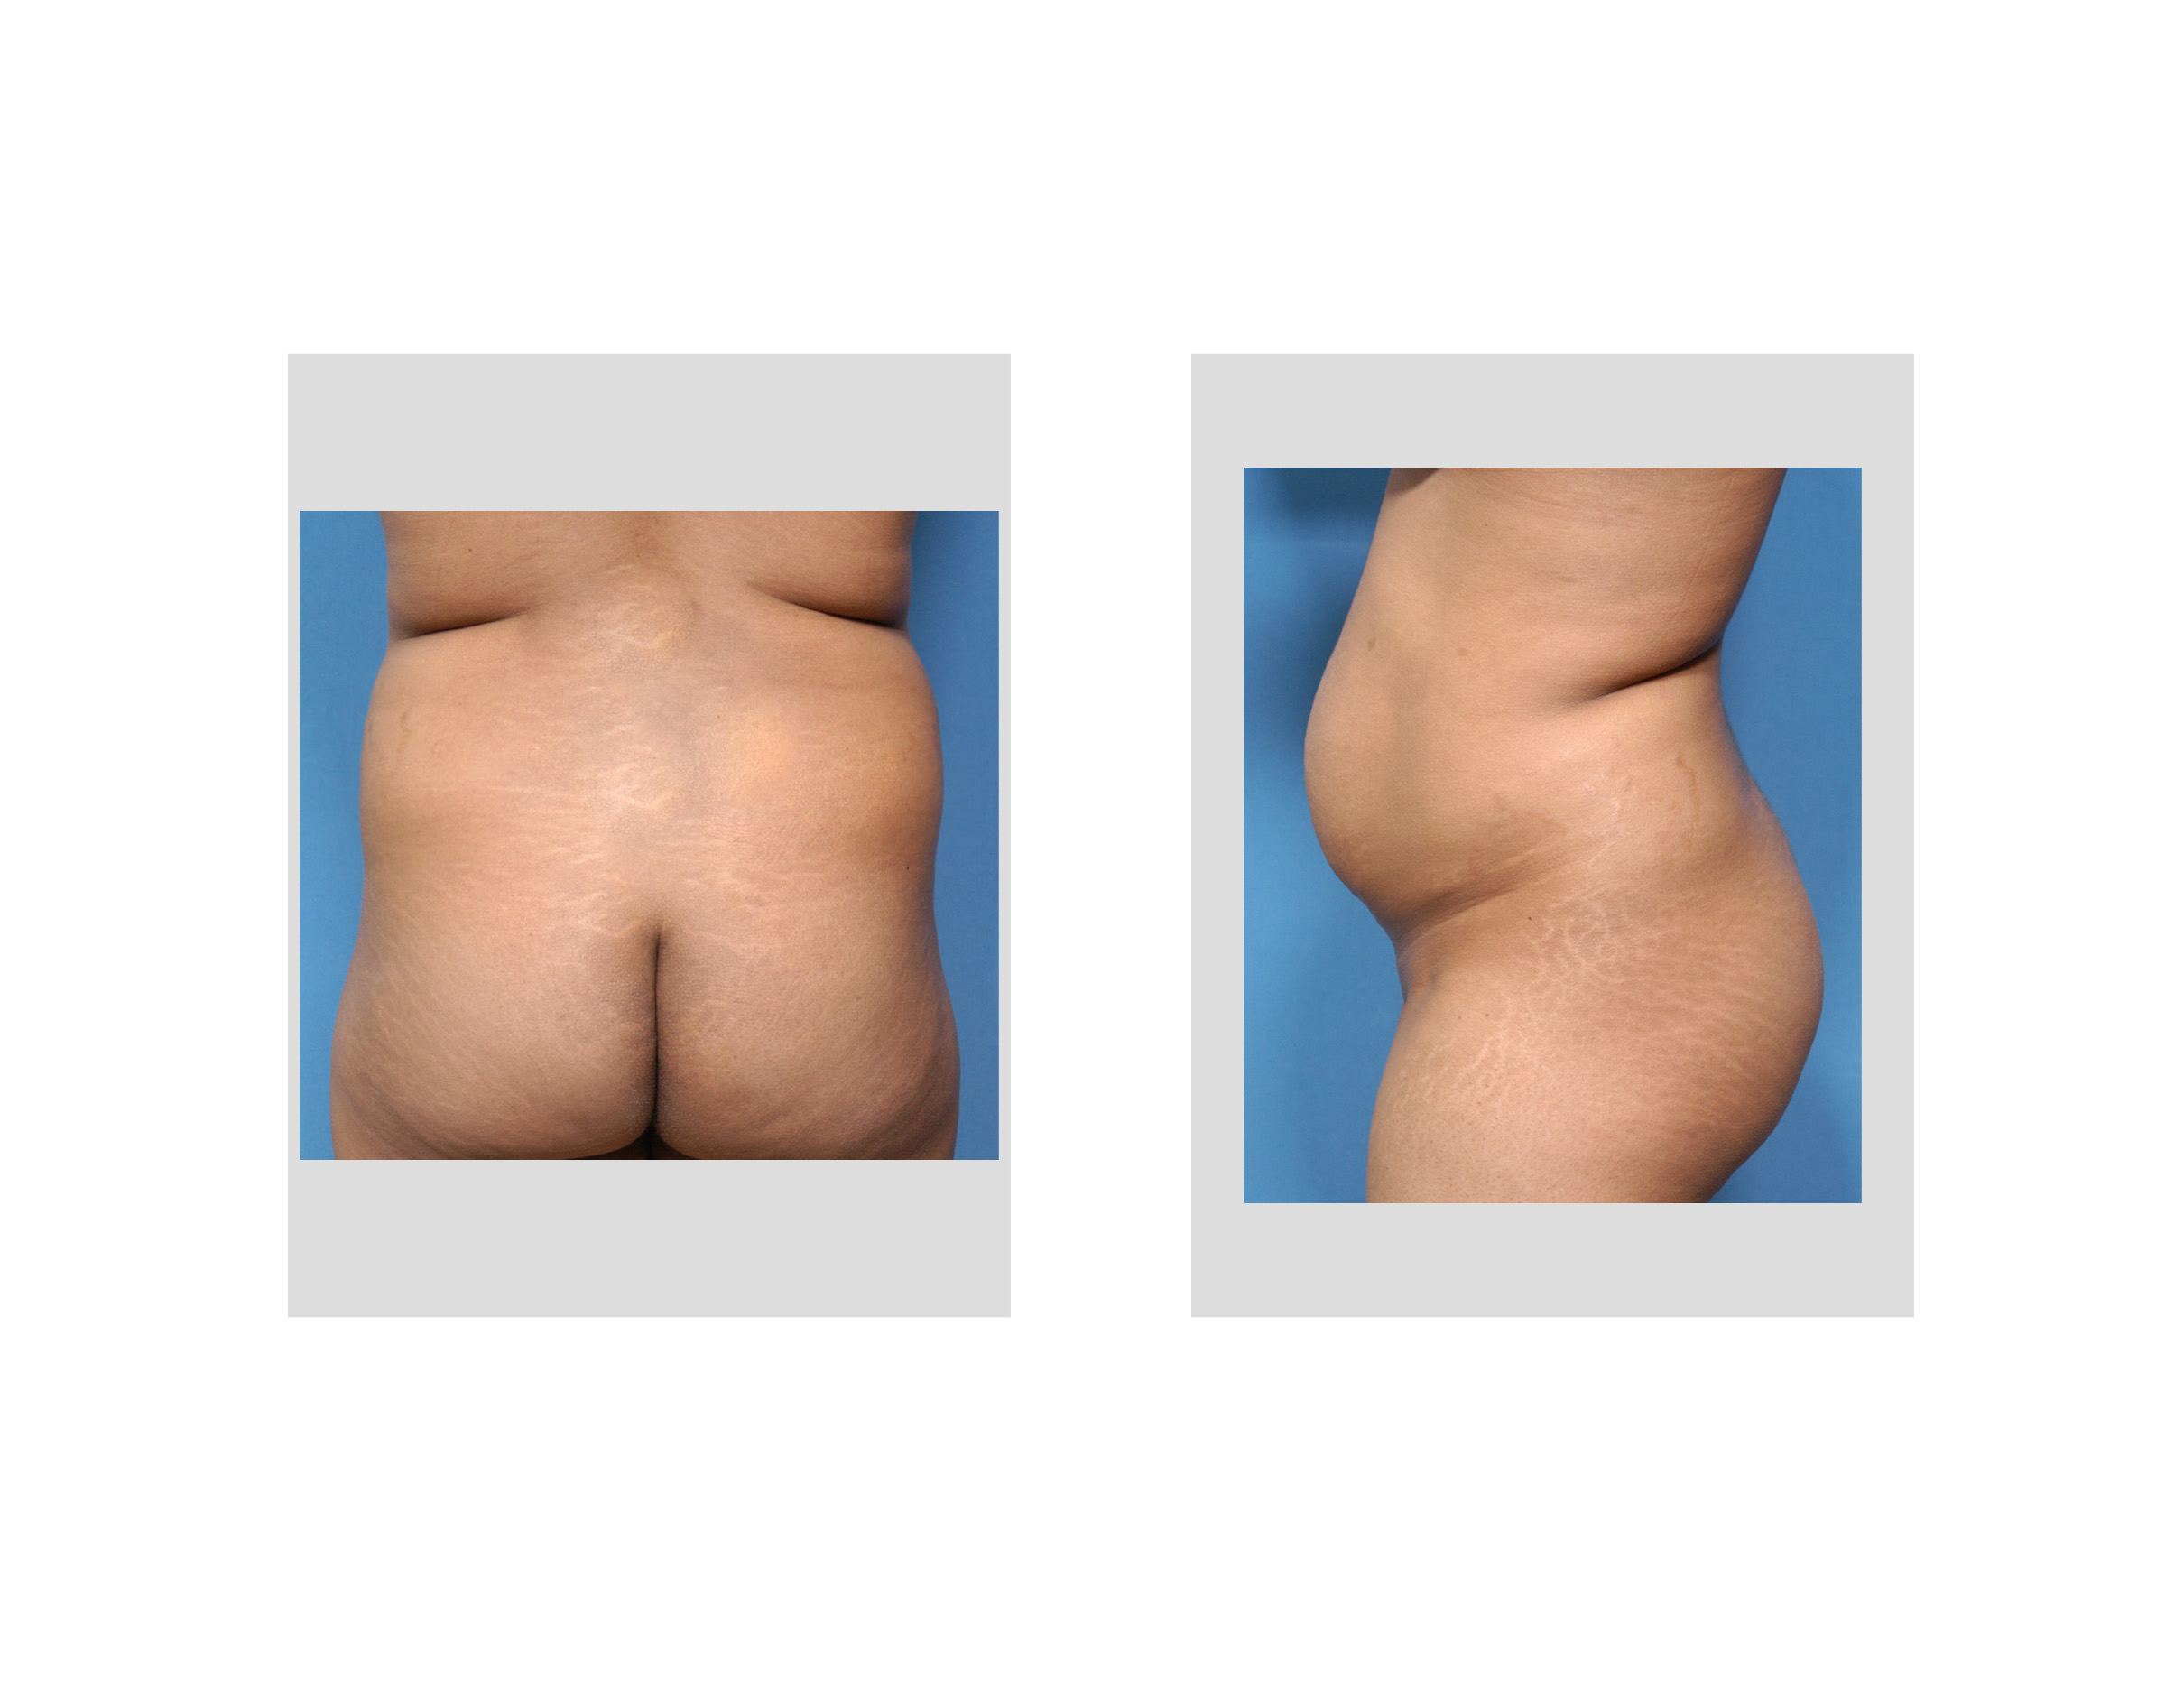 Waistline Reshaping With Muffin Top Liposuction - Explore Plastic